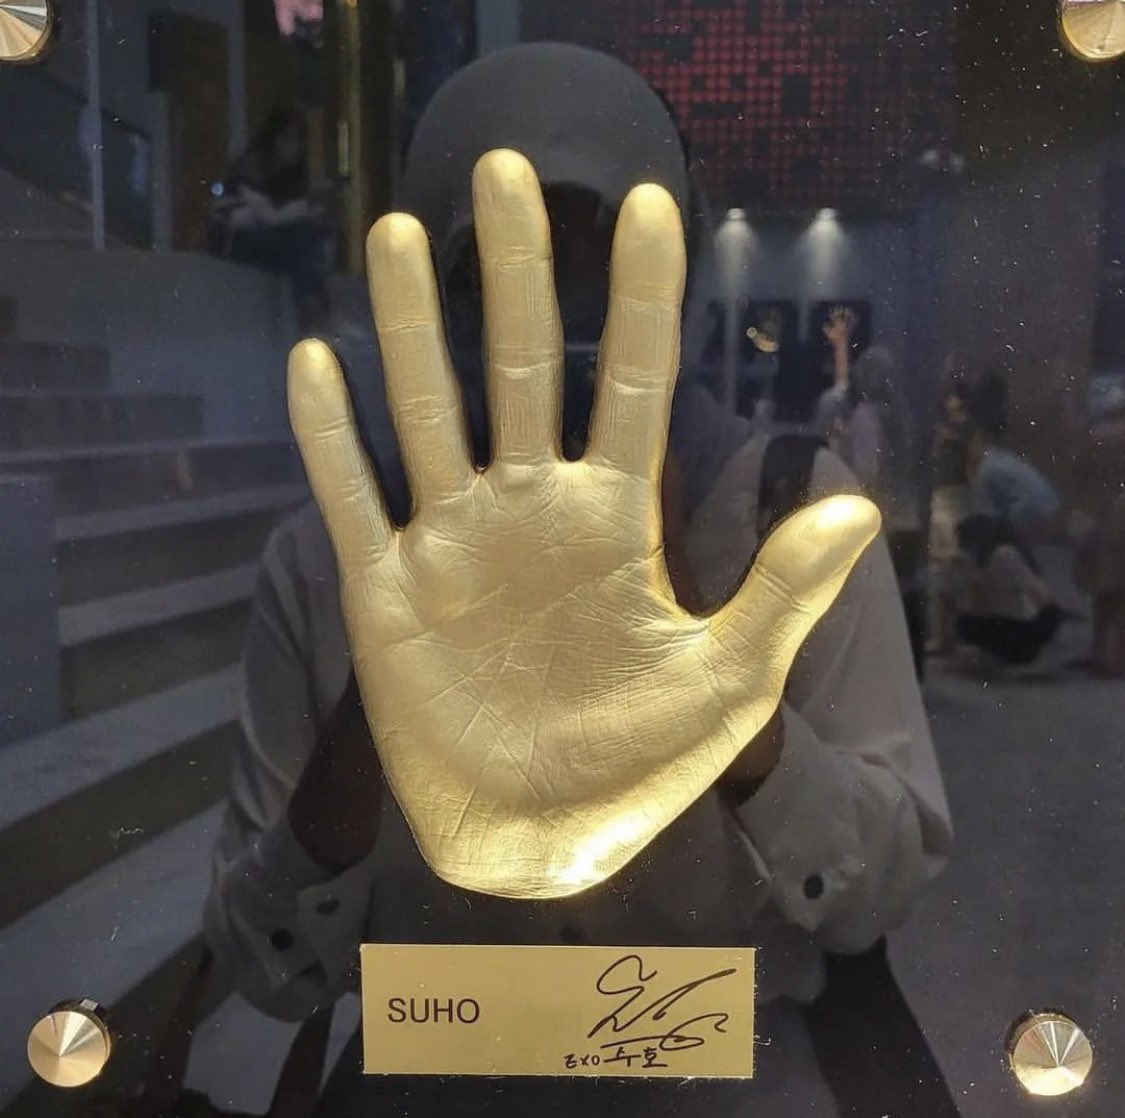 Did you know that EXO was the first Asian artist, and only third after Michael Jackson and Ariana Grande, to have its own hand prints on Tower Records Japan in Shibuya? 🇯🇵 This rare honor was accompanied with a display of their MV outfits for Japanese single 'Coming Over'! 🔥